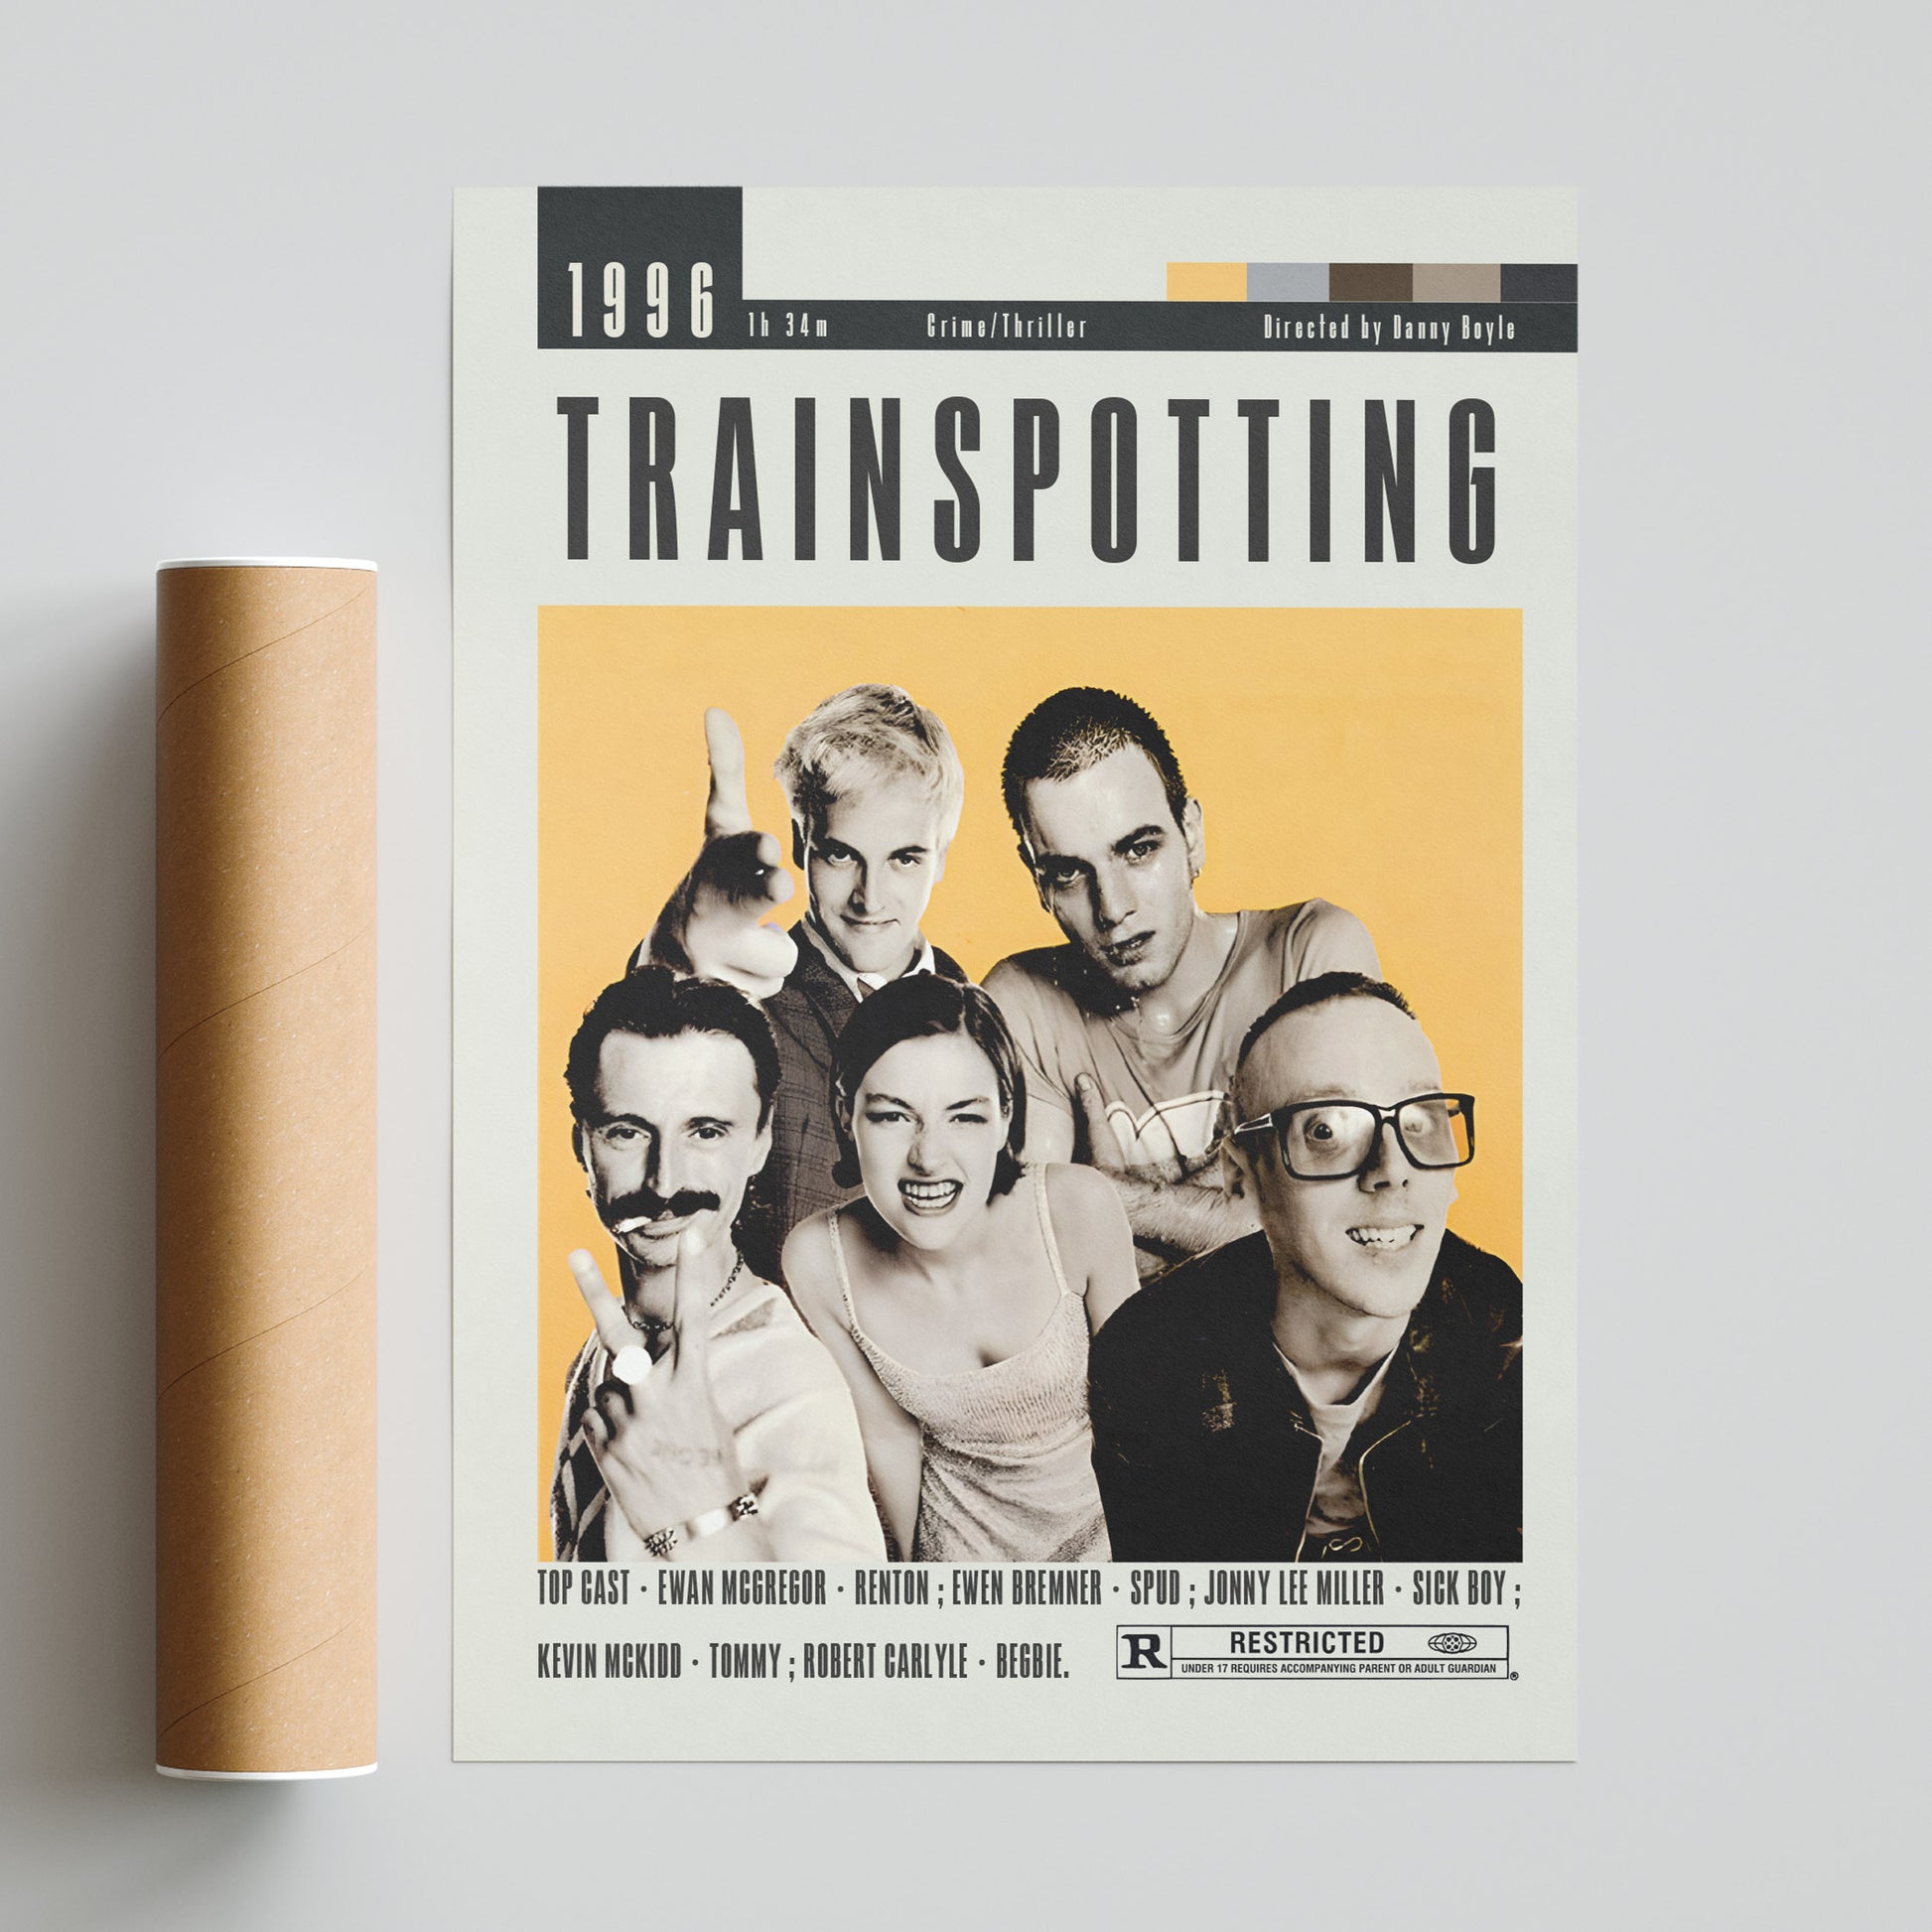 "Choo-choose the perfect addition to your room with this Trainspotting poster featuring handmade illustrations. It's the best selection of movie posters in the UK and makes a unique gift. Danny Boyle fans, this one's for you (if you're a trainspotter)."